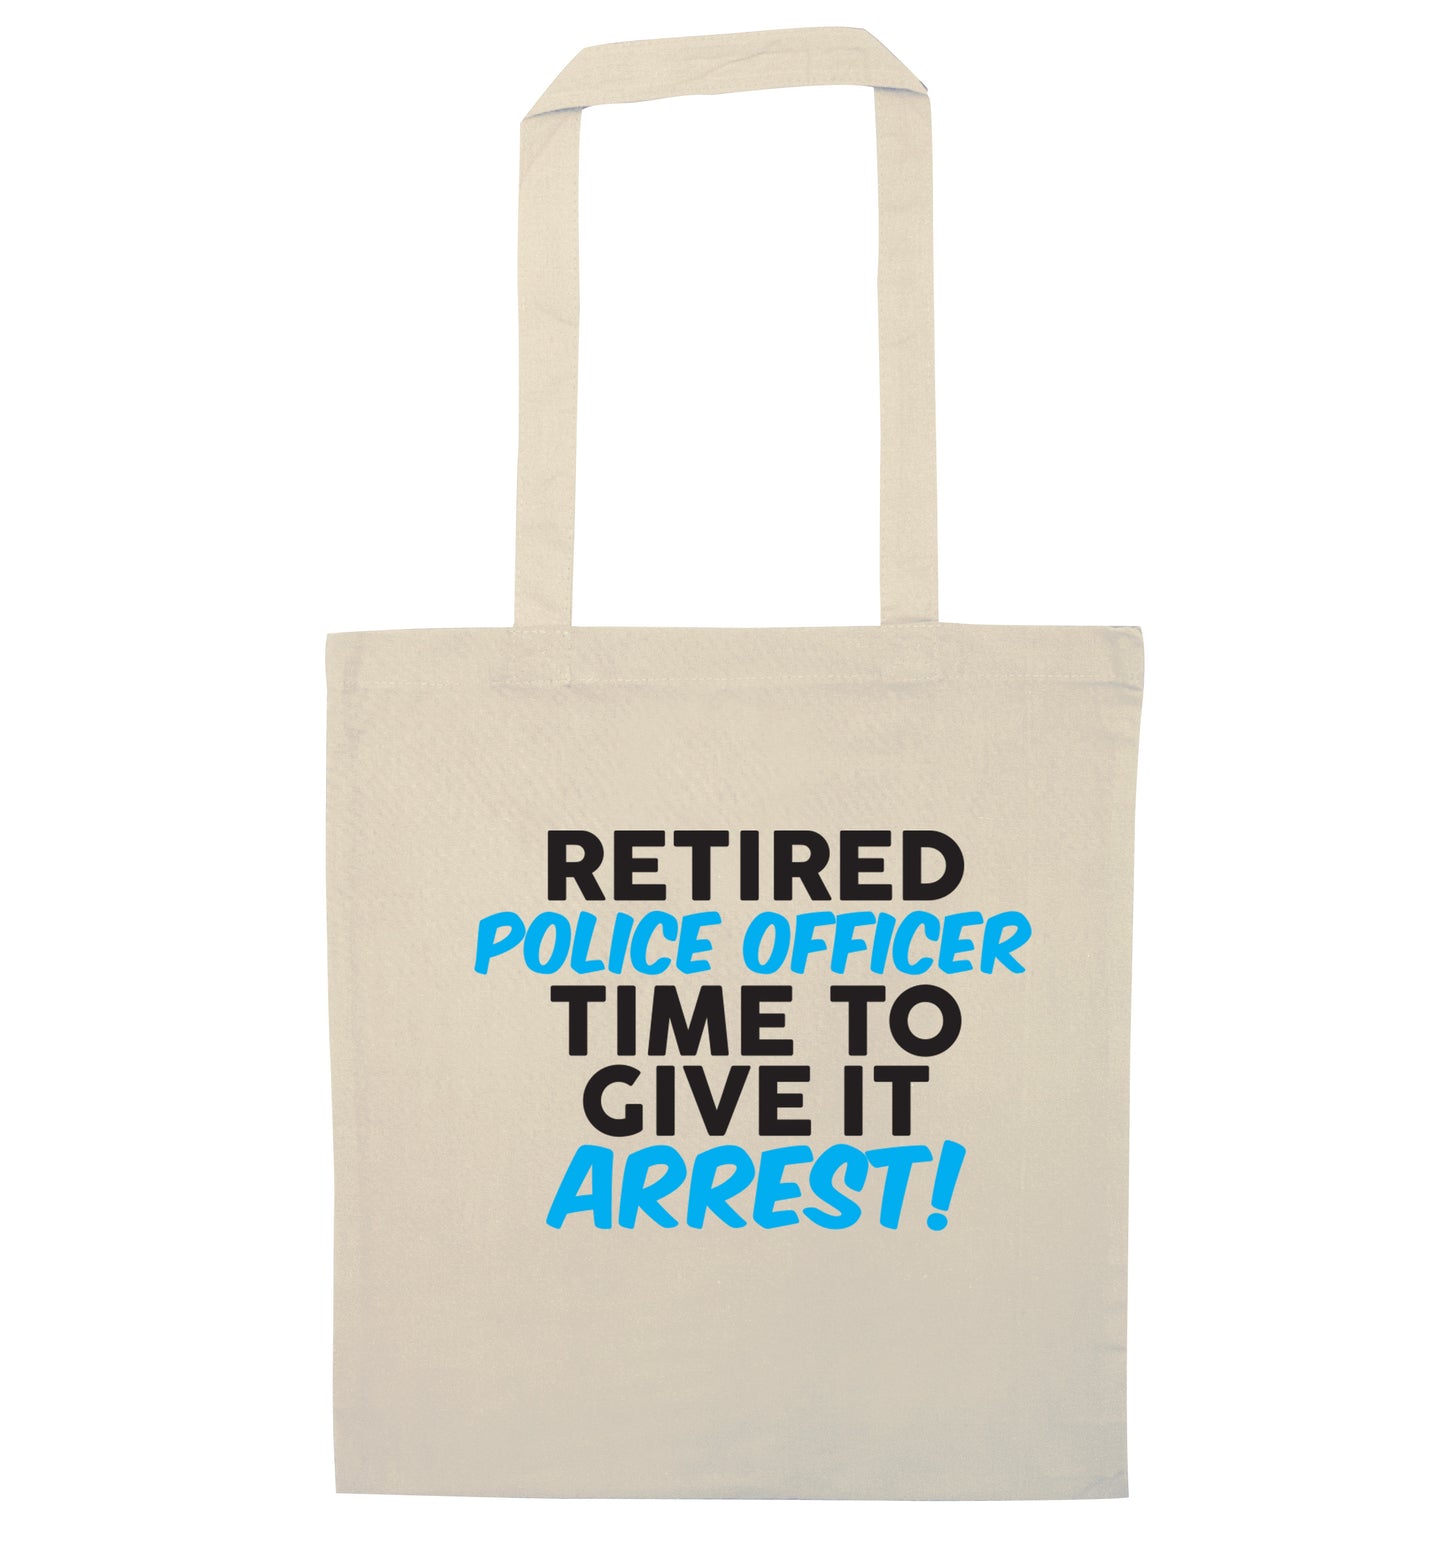 Retired police officer time to give it arrest natural tote bag